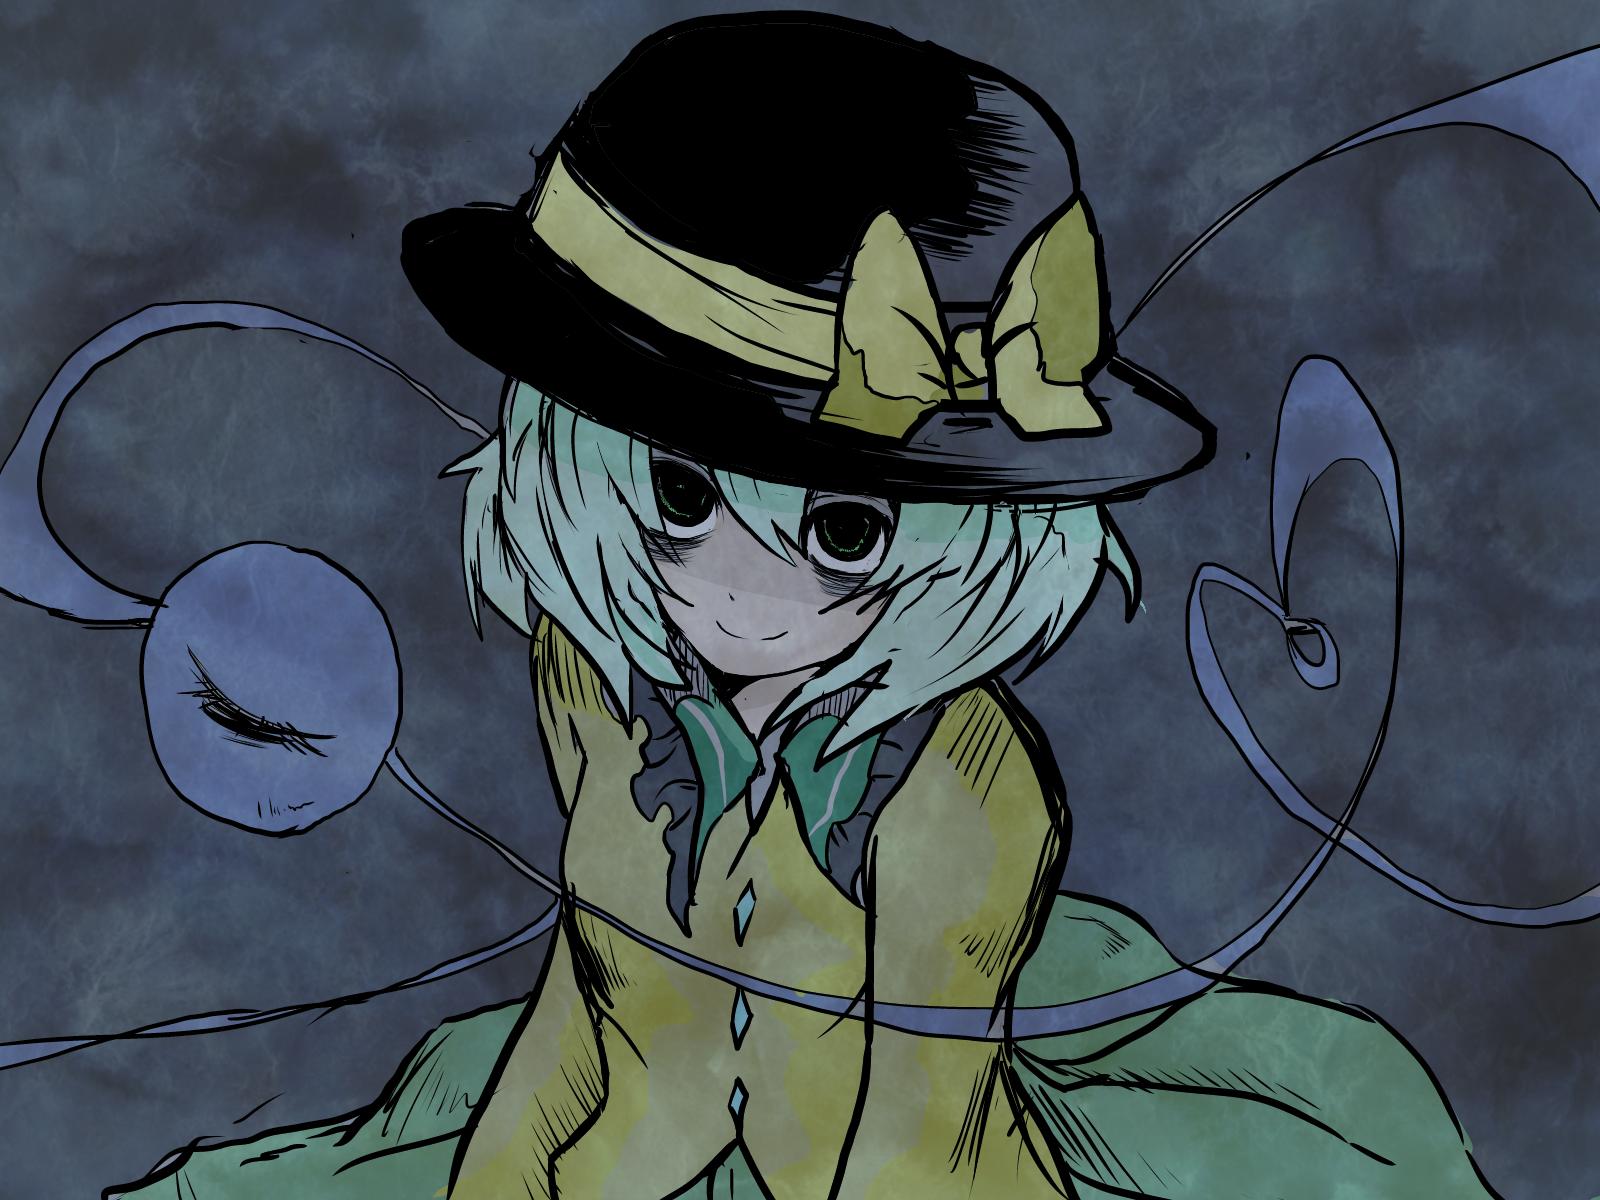 Give me Koishi Komeiji from Touhou pictures! 